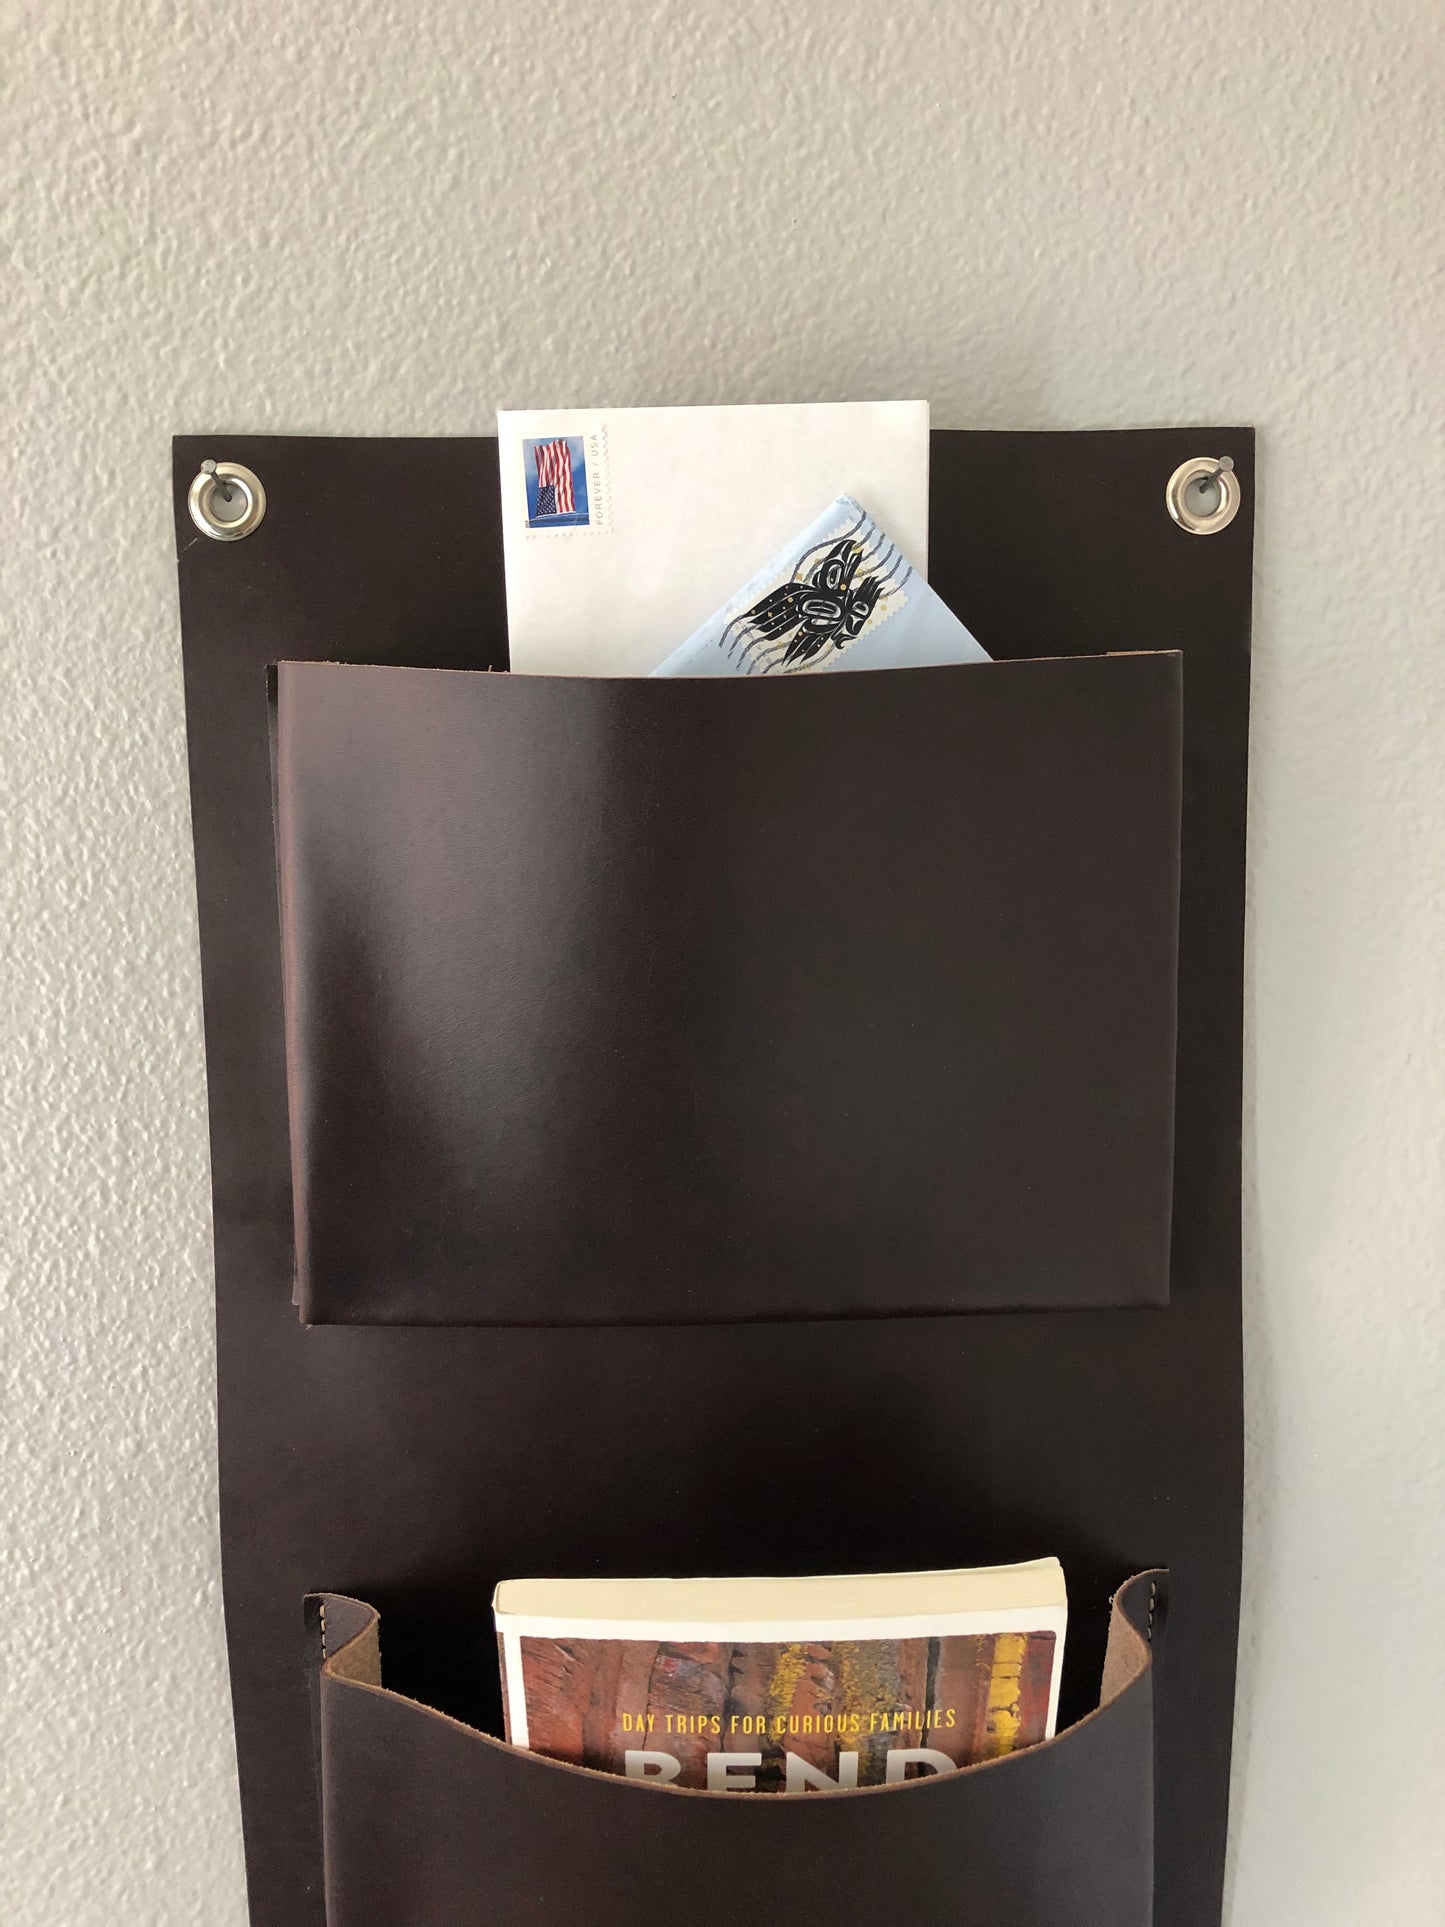 Leather Wall Organizer | Hanging Storage Pockets | Vertical Organizer for Scarves, Mail, or Shoes